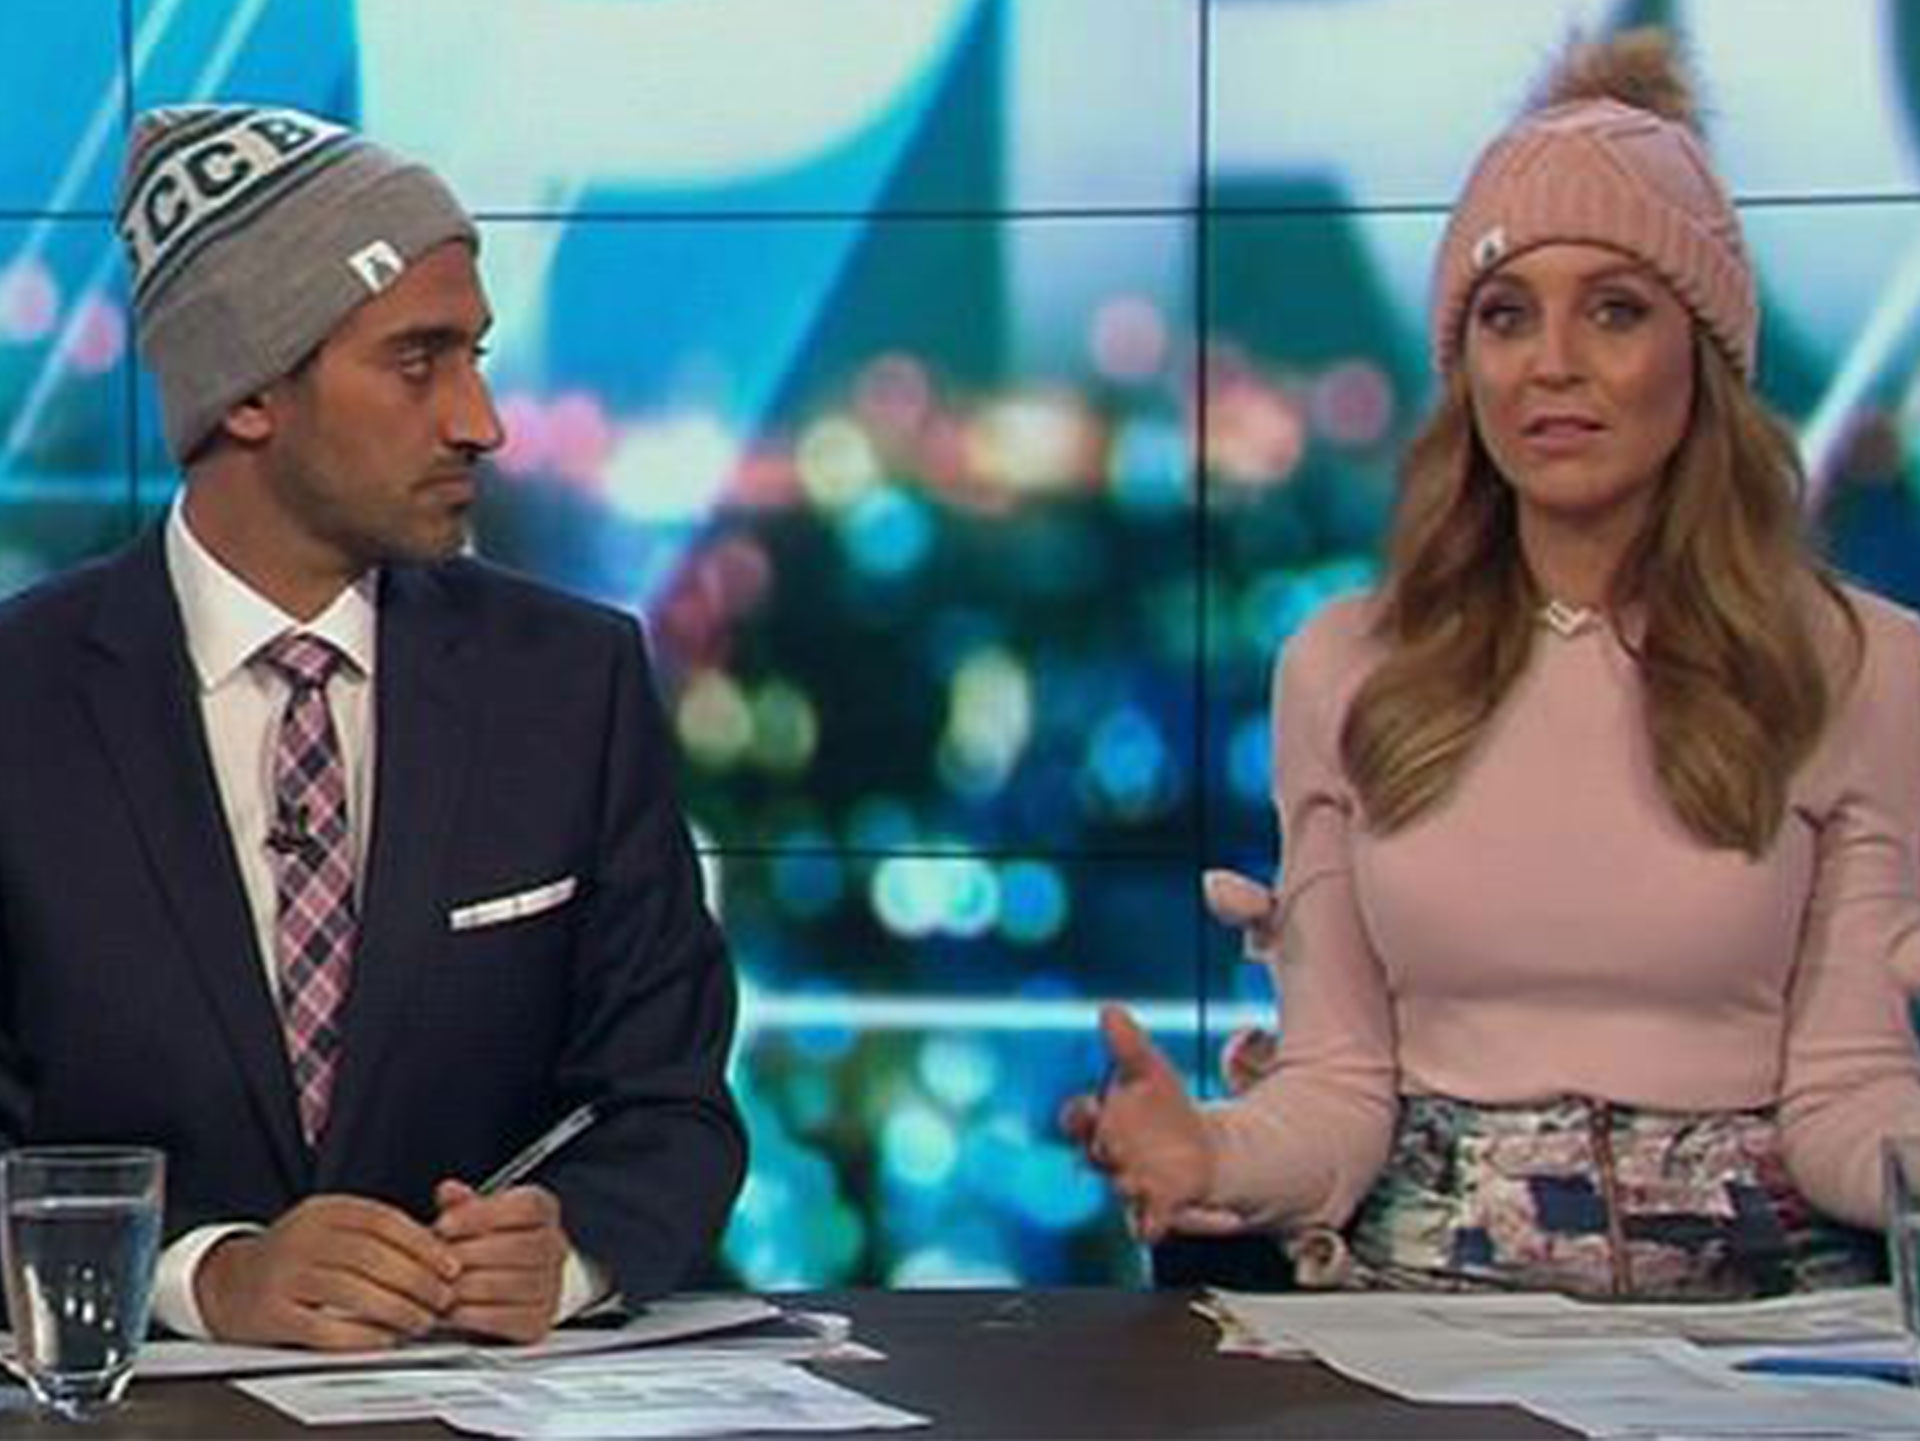 Carrie Bickmore faces backlash over fundraising for brain cancer